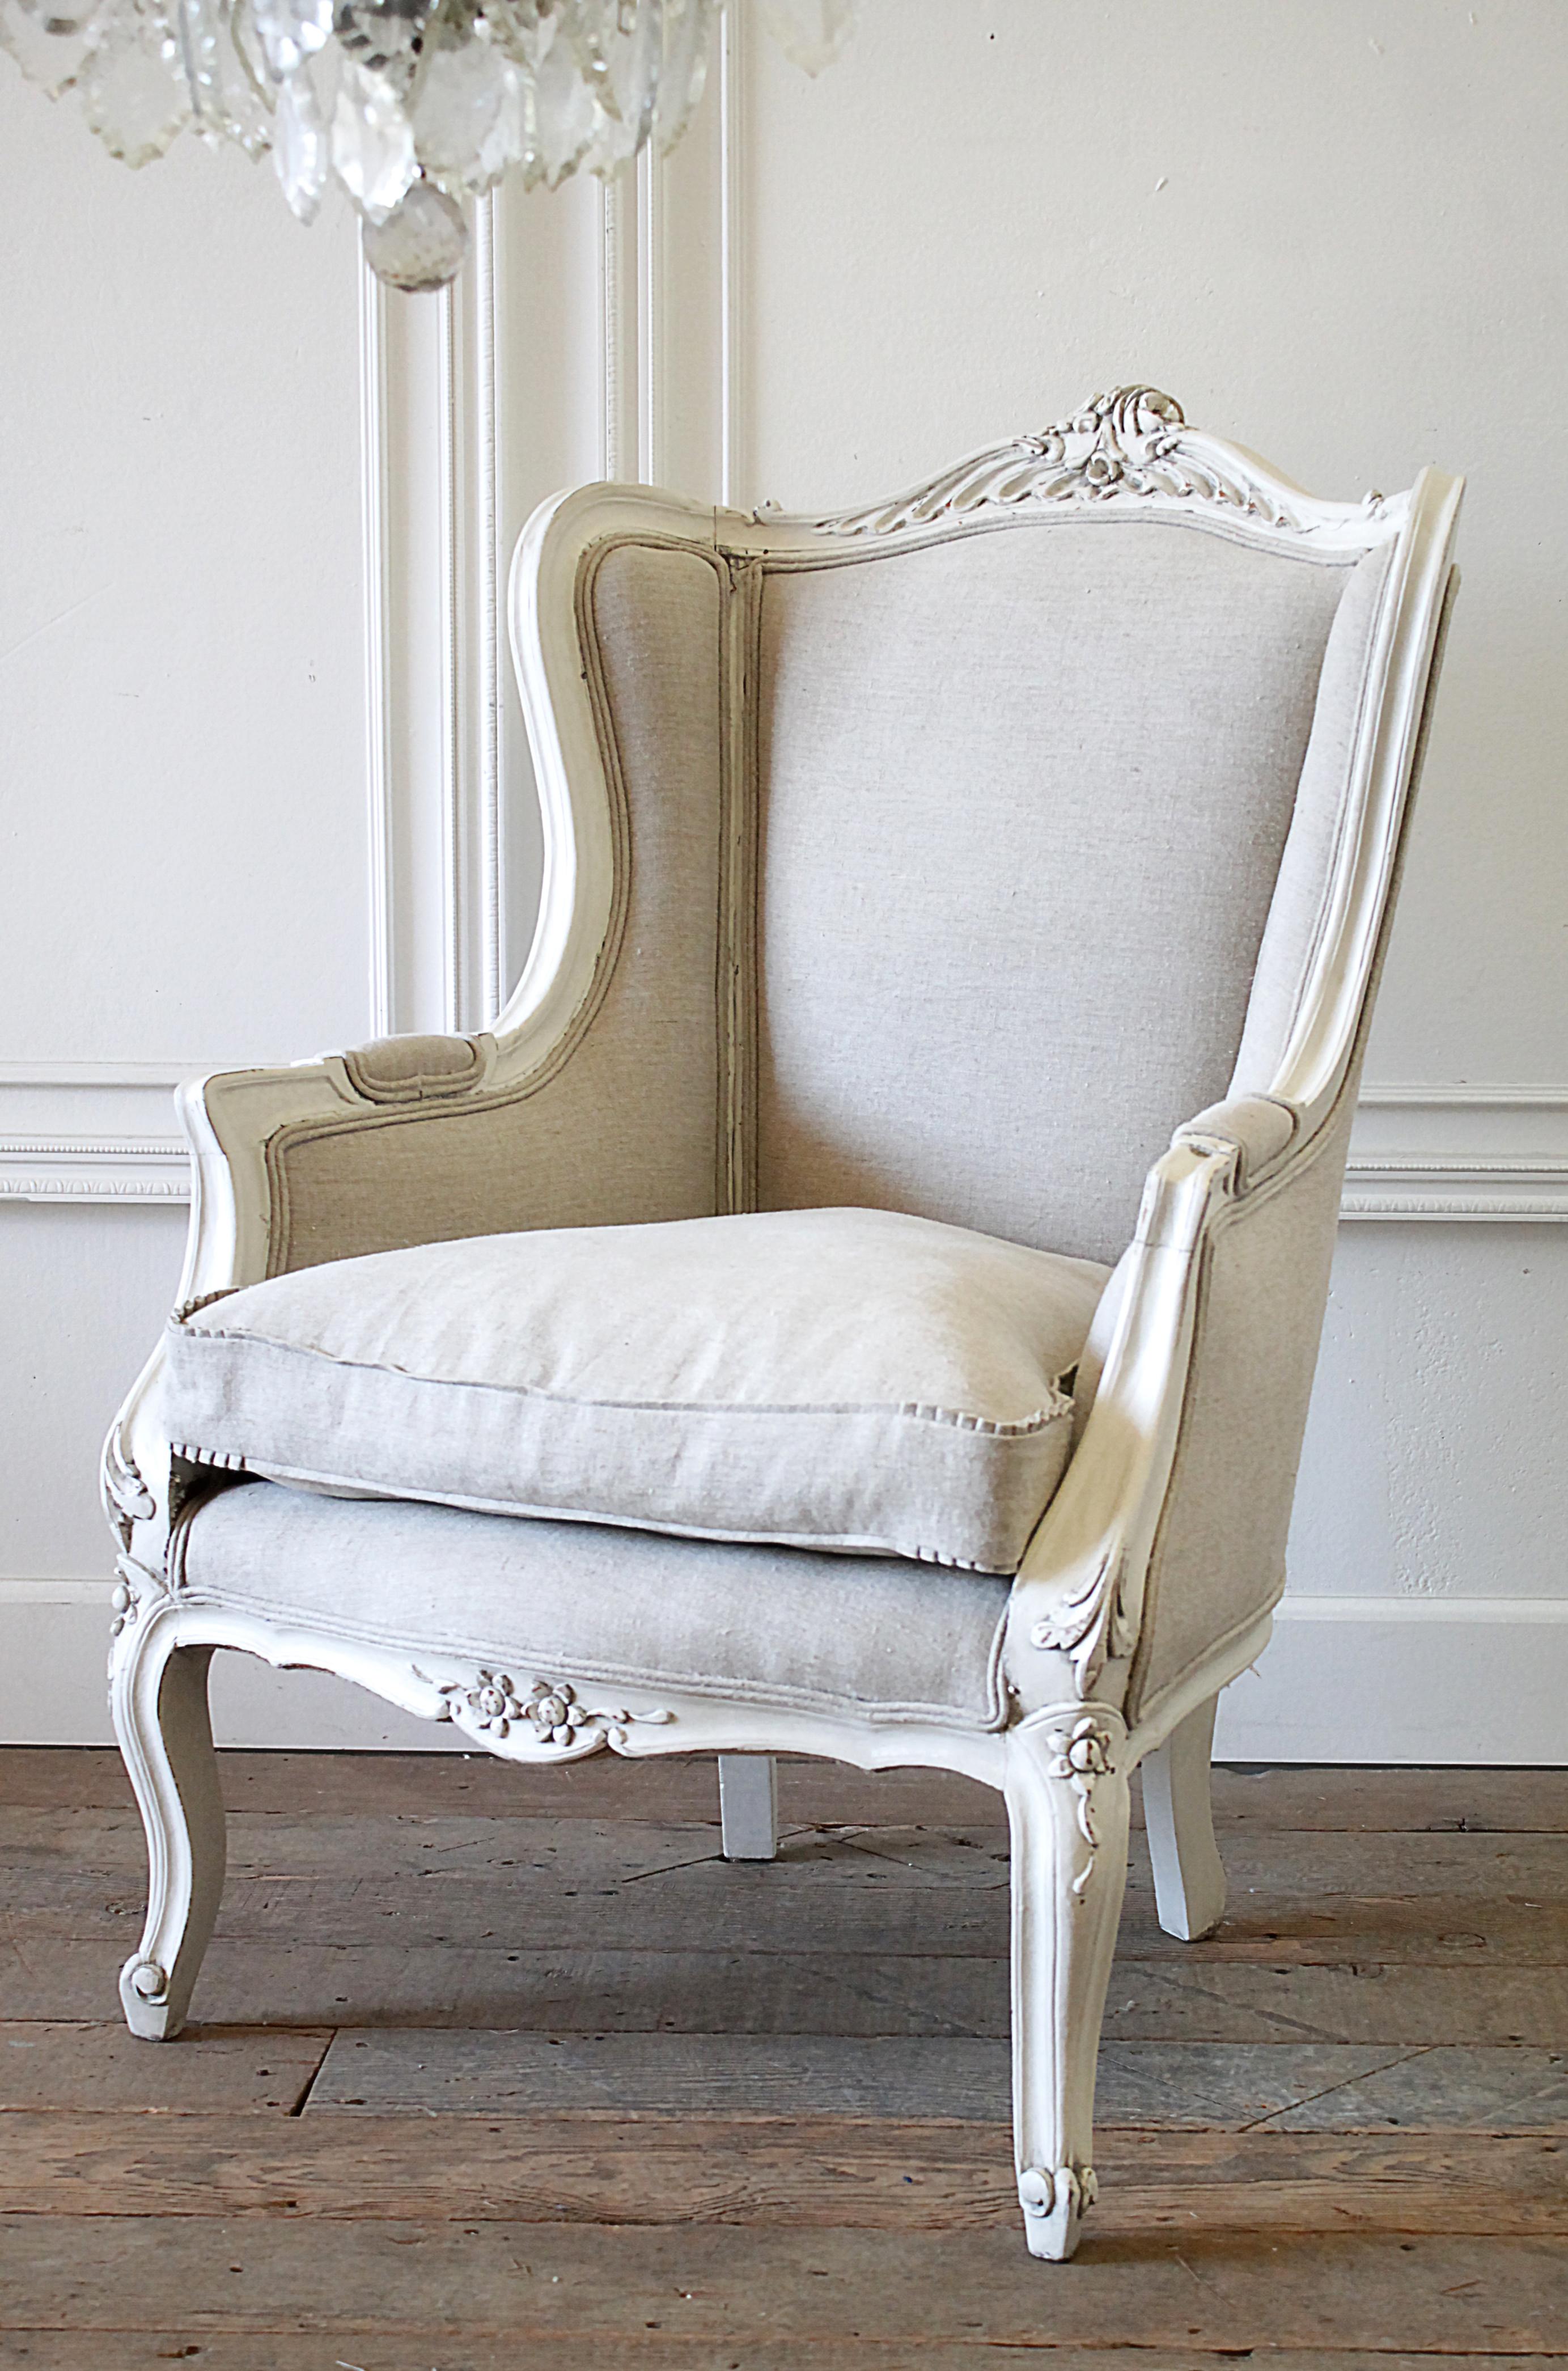 20th century Louis XV style wingback chair new Belgian linen upholstery.
Painted in our soft oyster white, which is a soft white with subtle distressed edges, and finished with an antique glaze patina. Paint color blends well with warm and cool